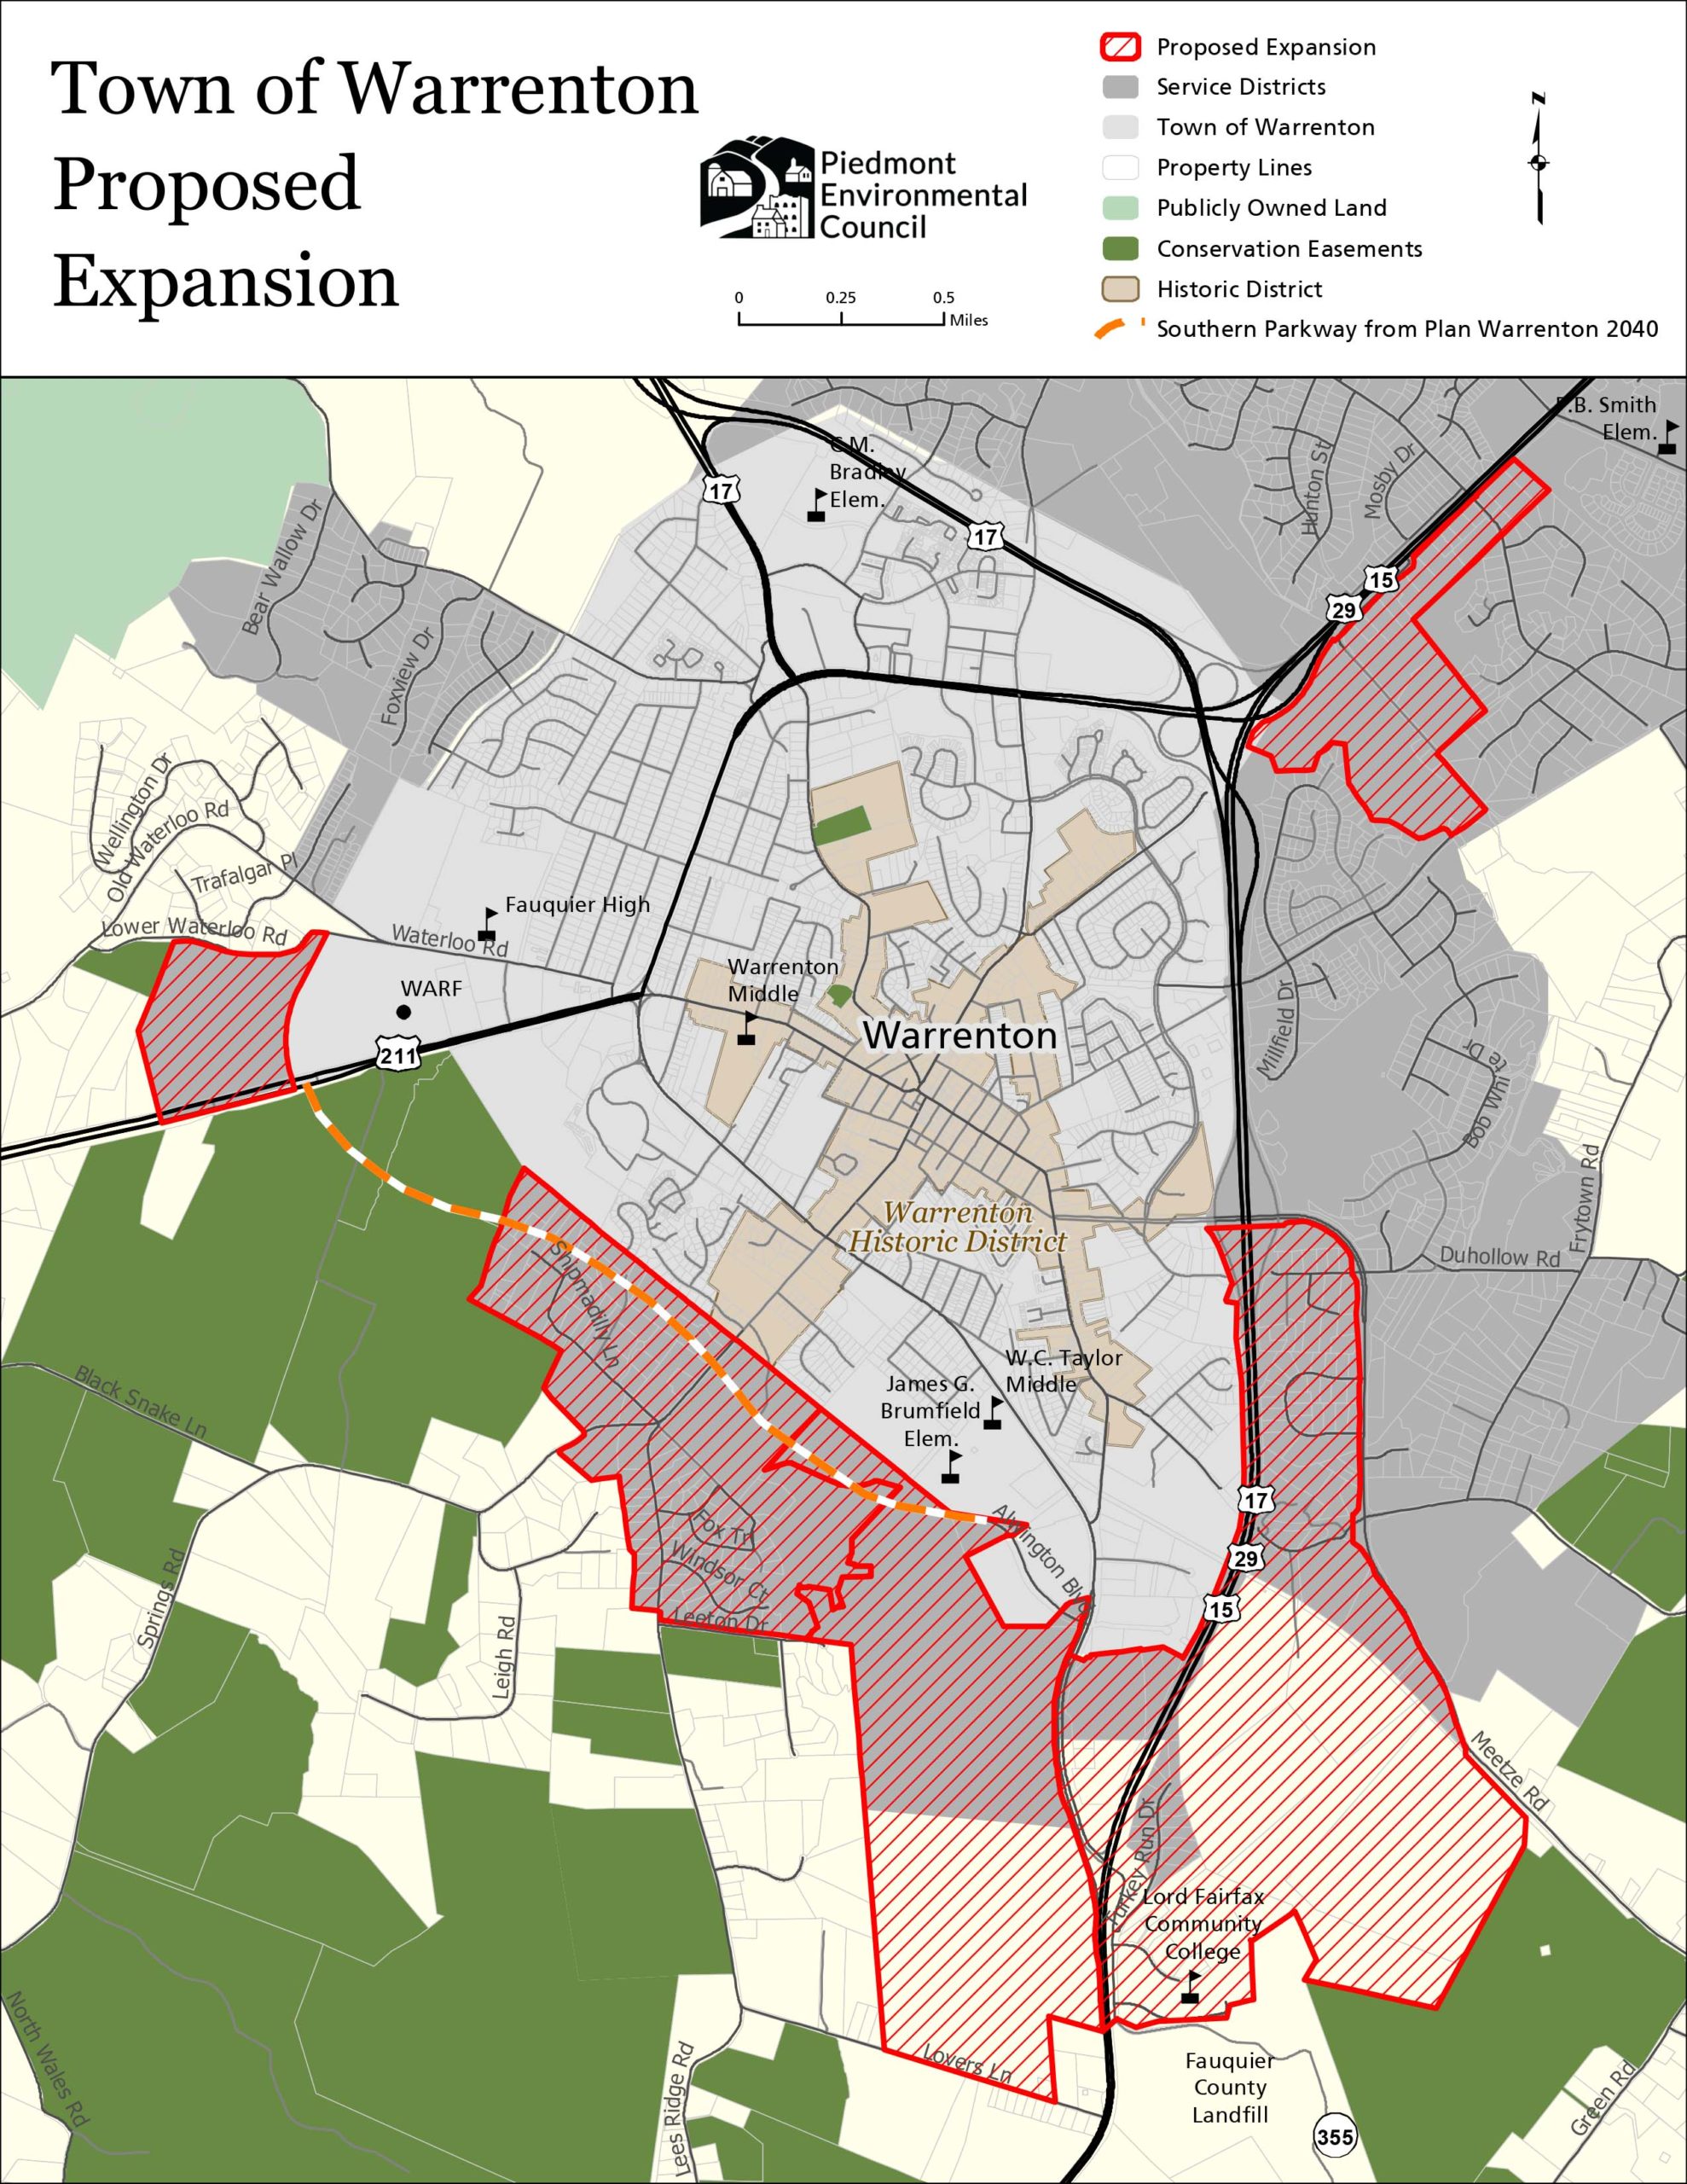 a map of Warrenton that shows red areas of expansion